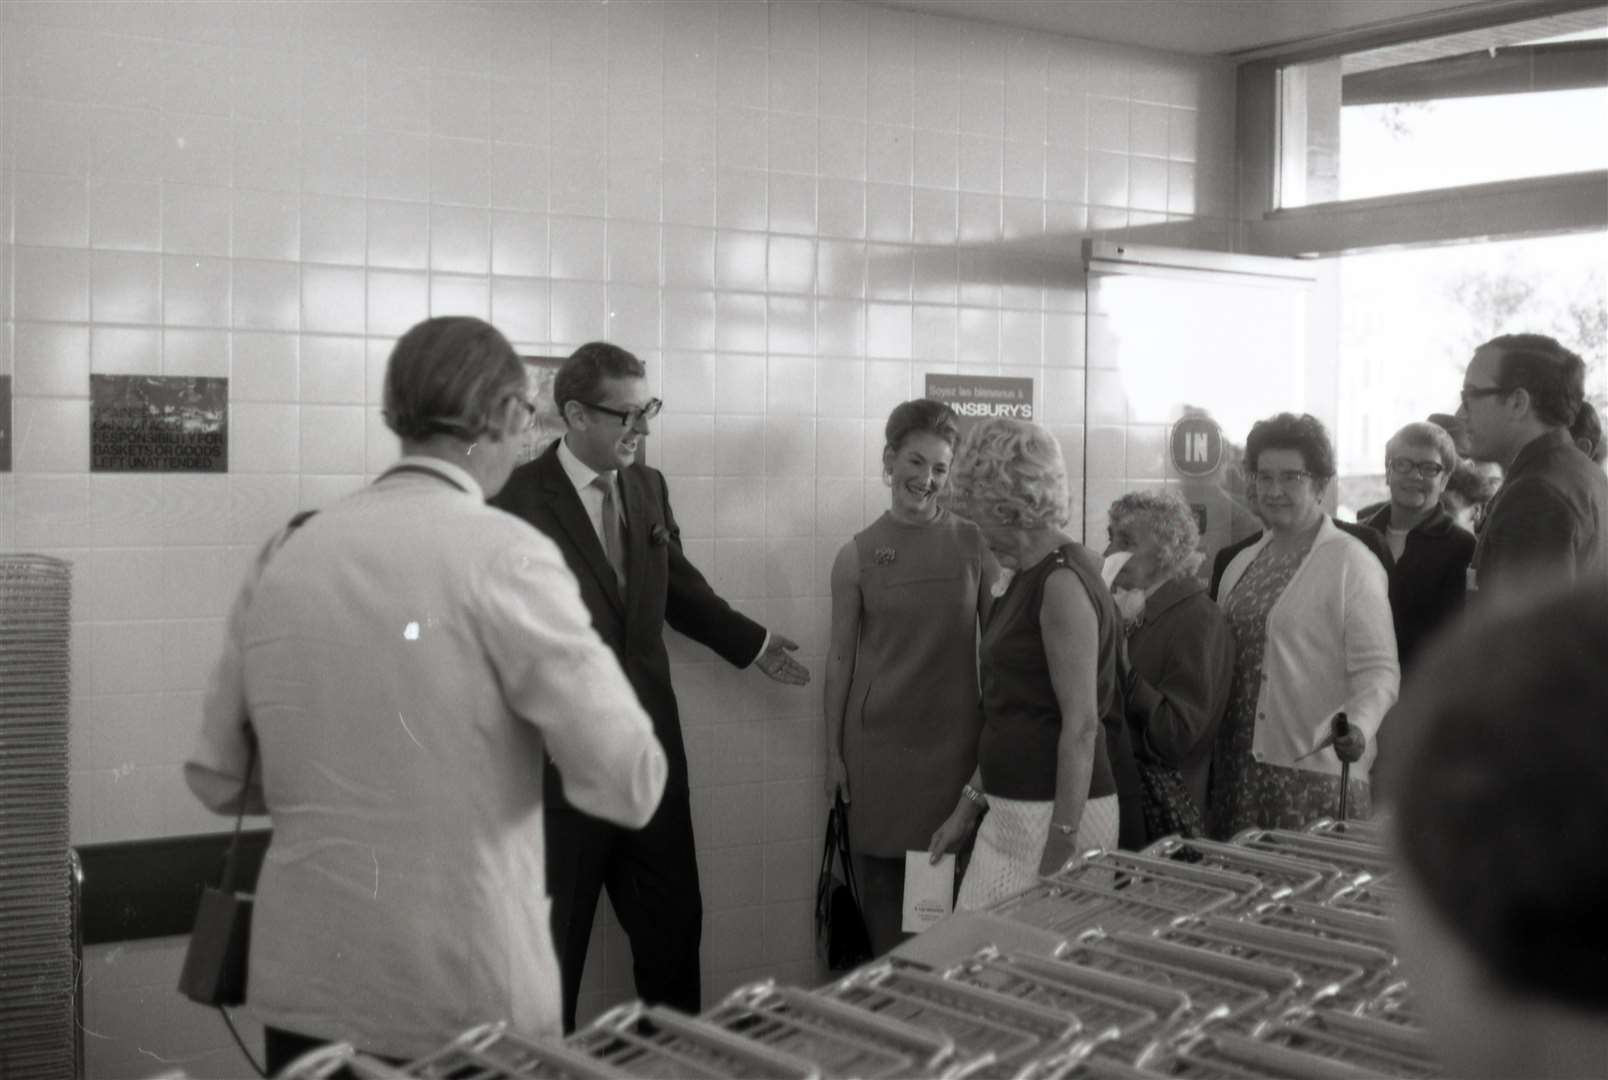 John Sainsbury - now Lord Sainsbury - welcomes shoppers at the West Terrace store in Folkestone in 1970. Picture: The Sainsbury Archive, Museum of London Docklands